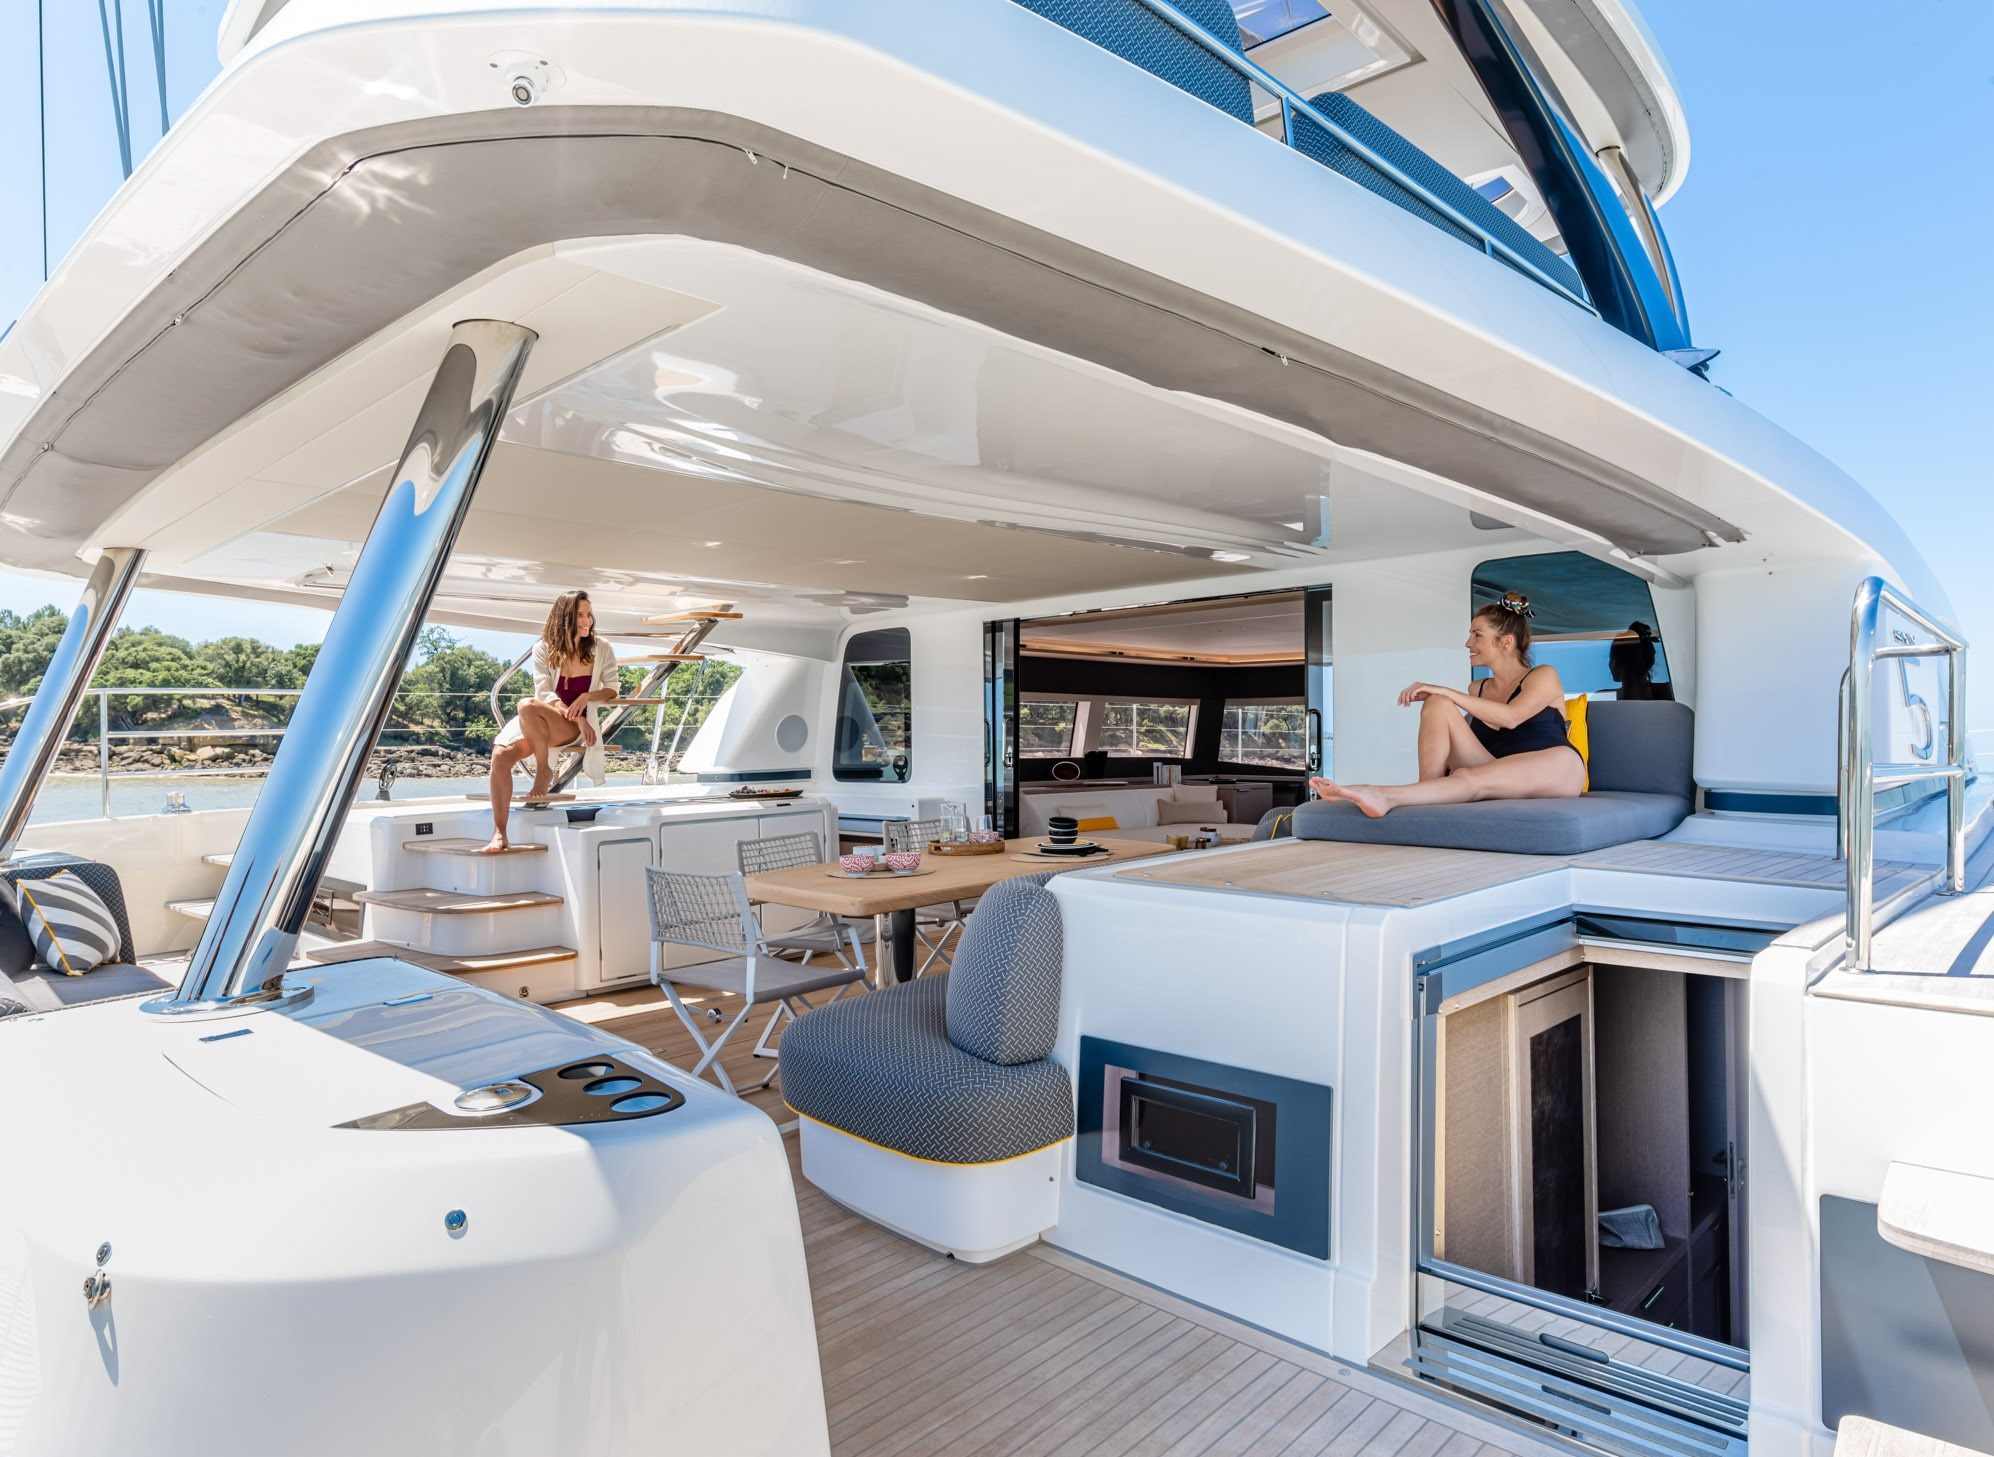 Seahome II aft cockpit with women sitting on back area